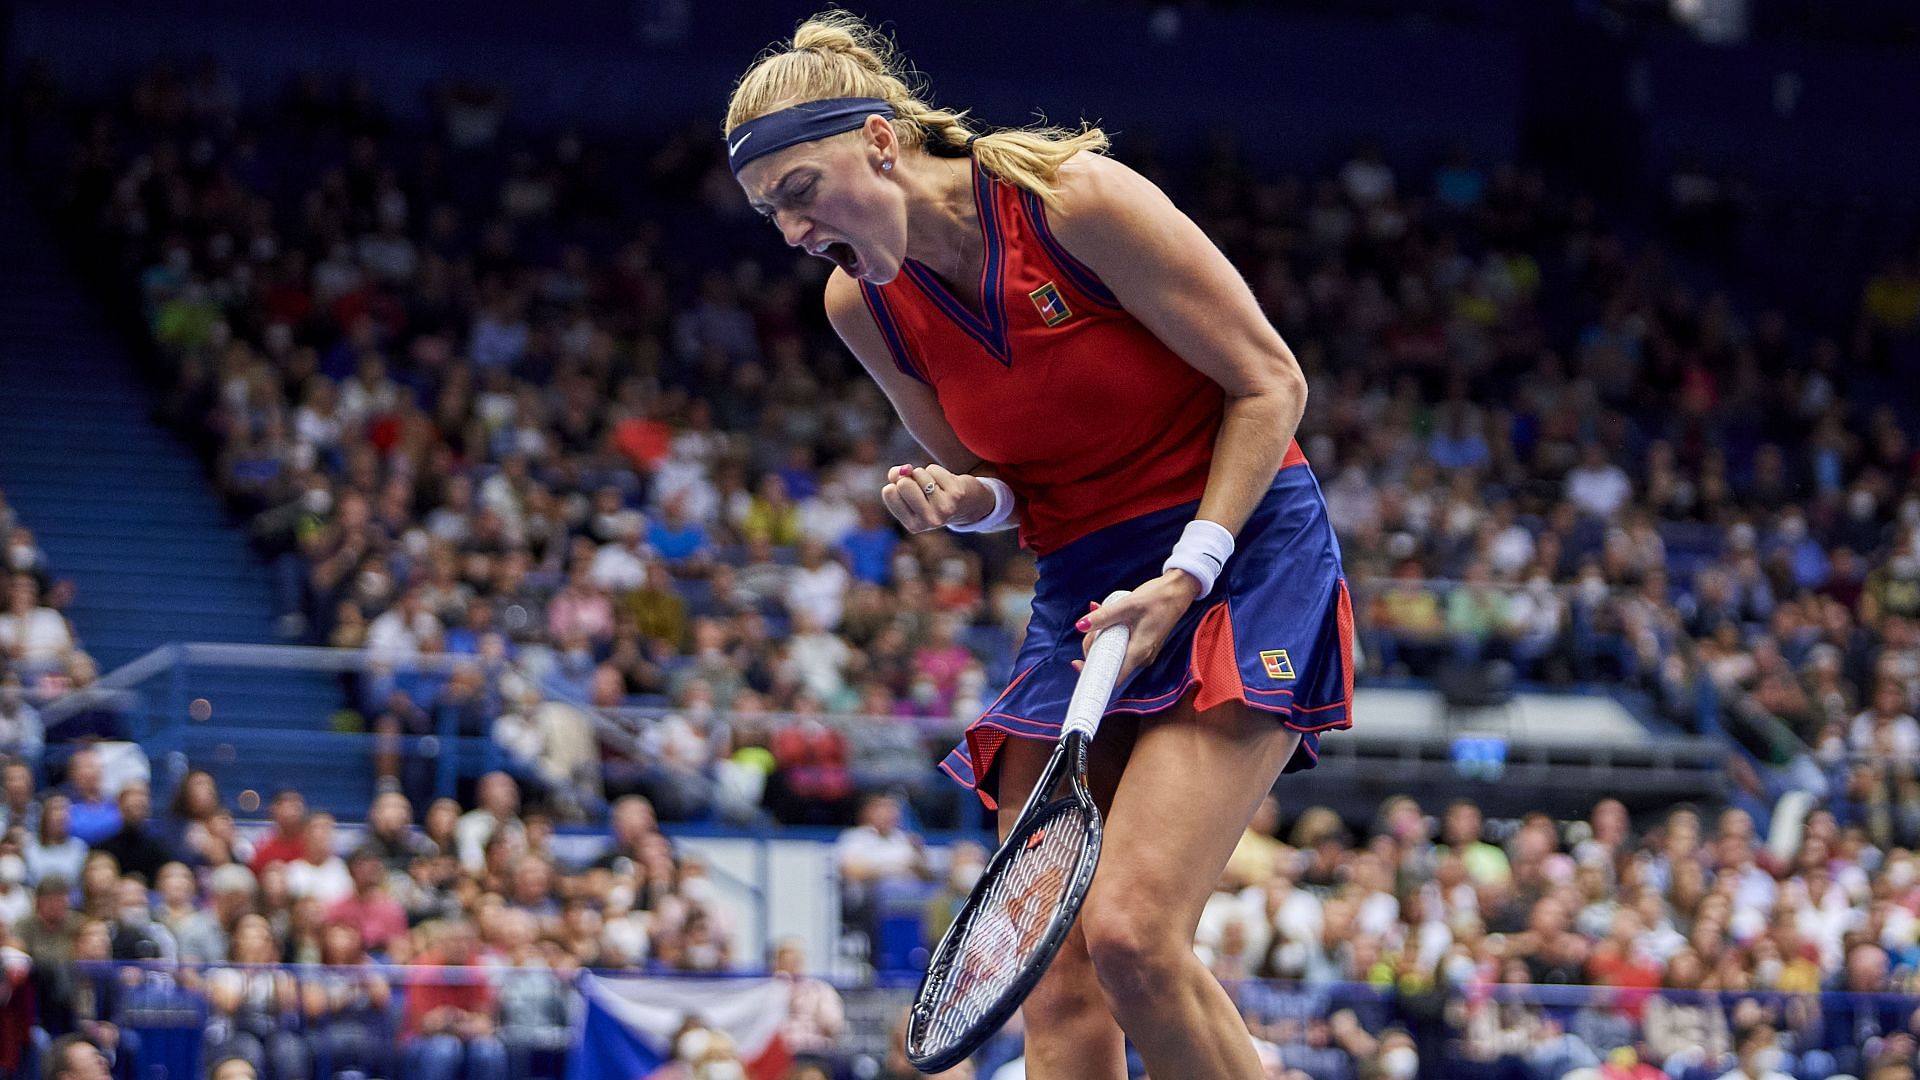 Petra Kvitova will be looking to build on her solid start to 2023.